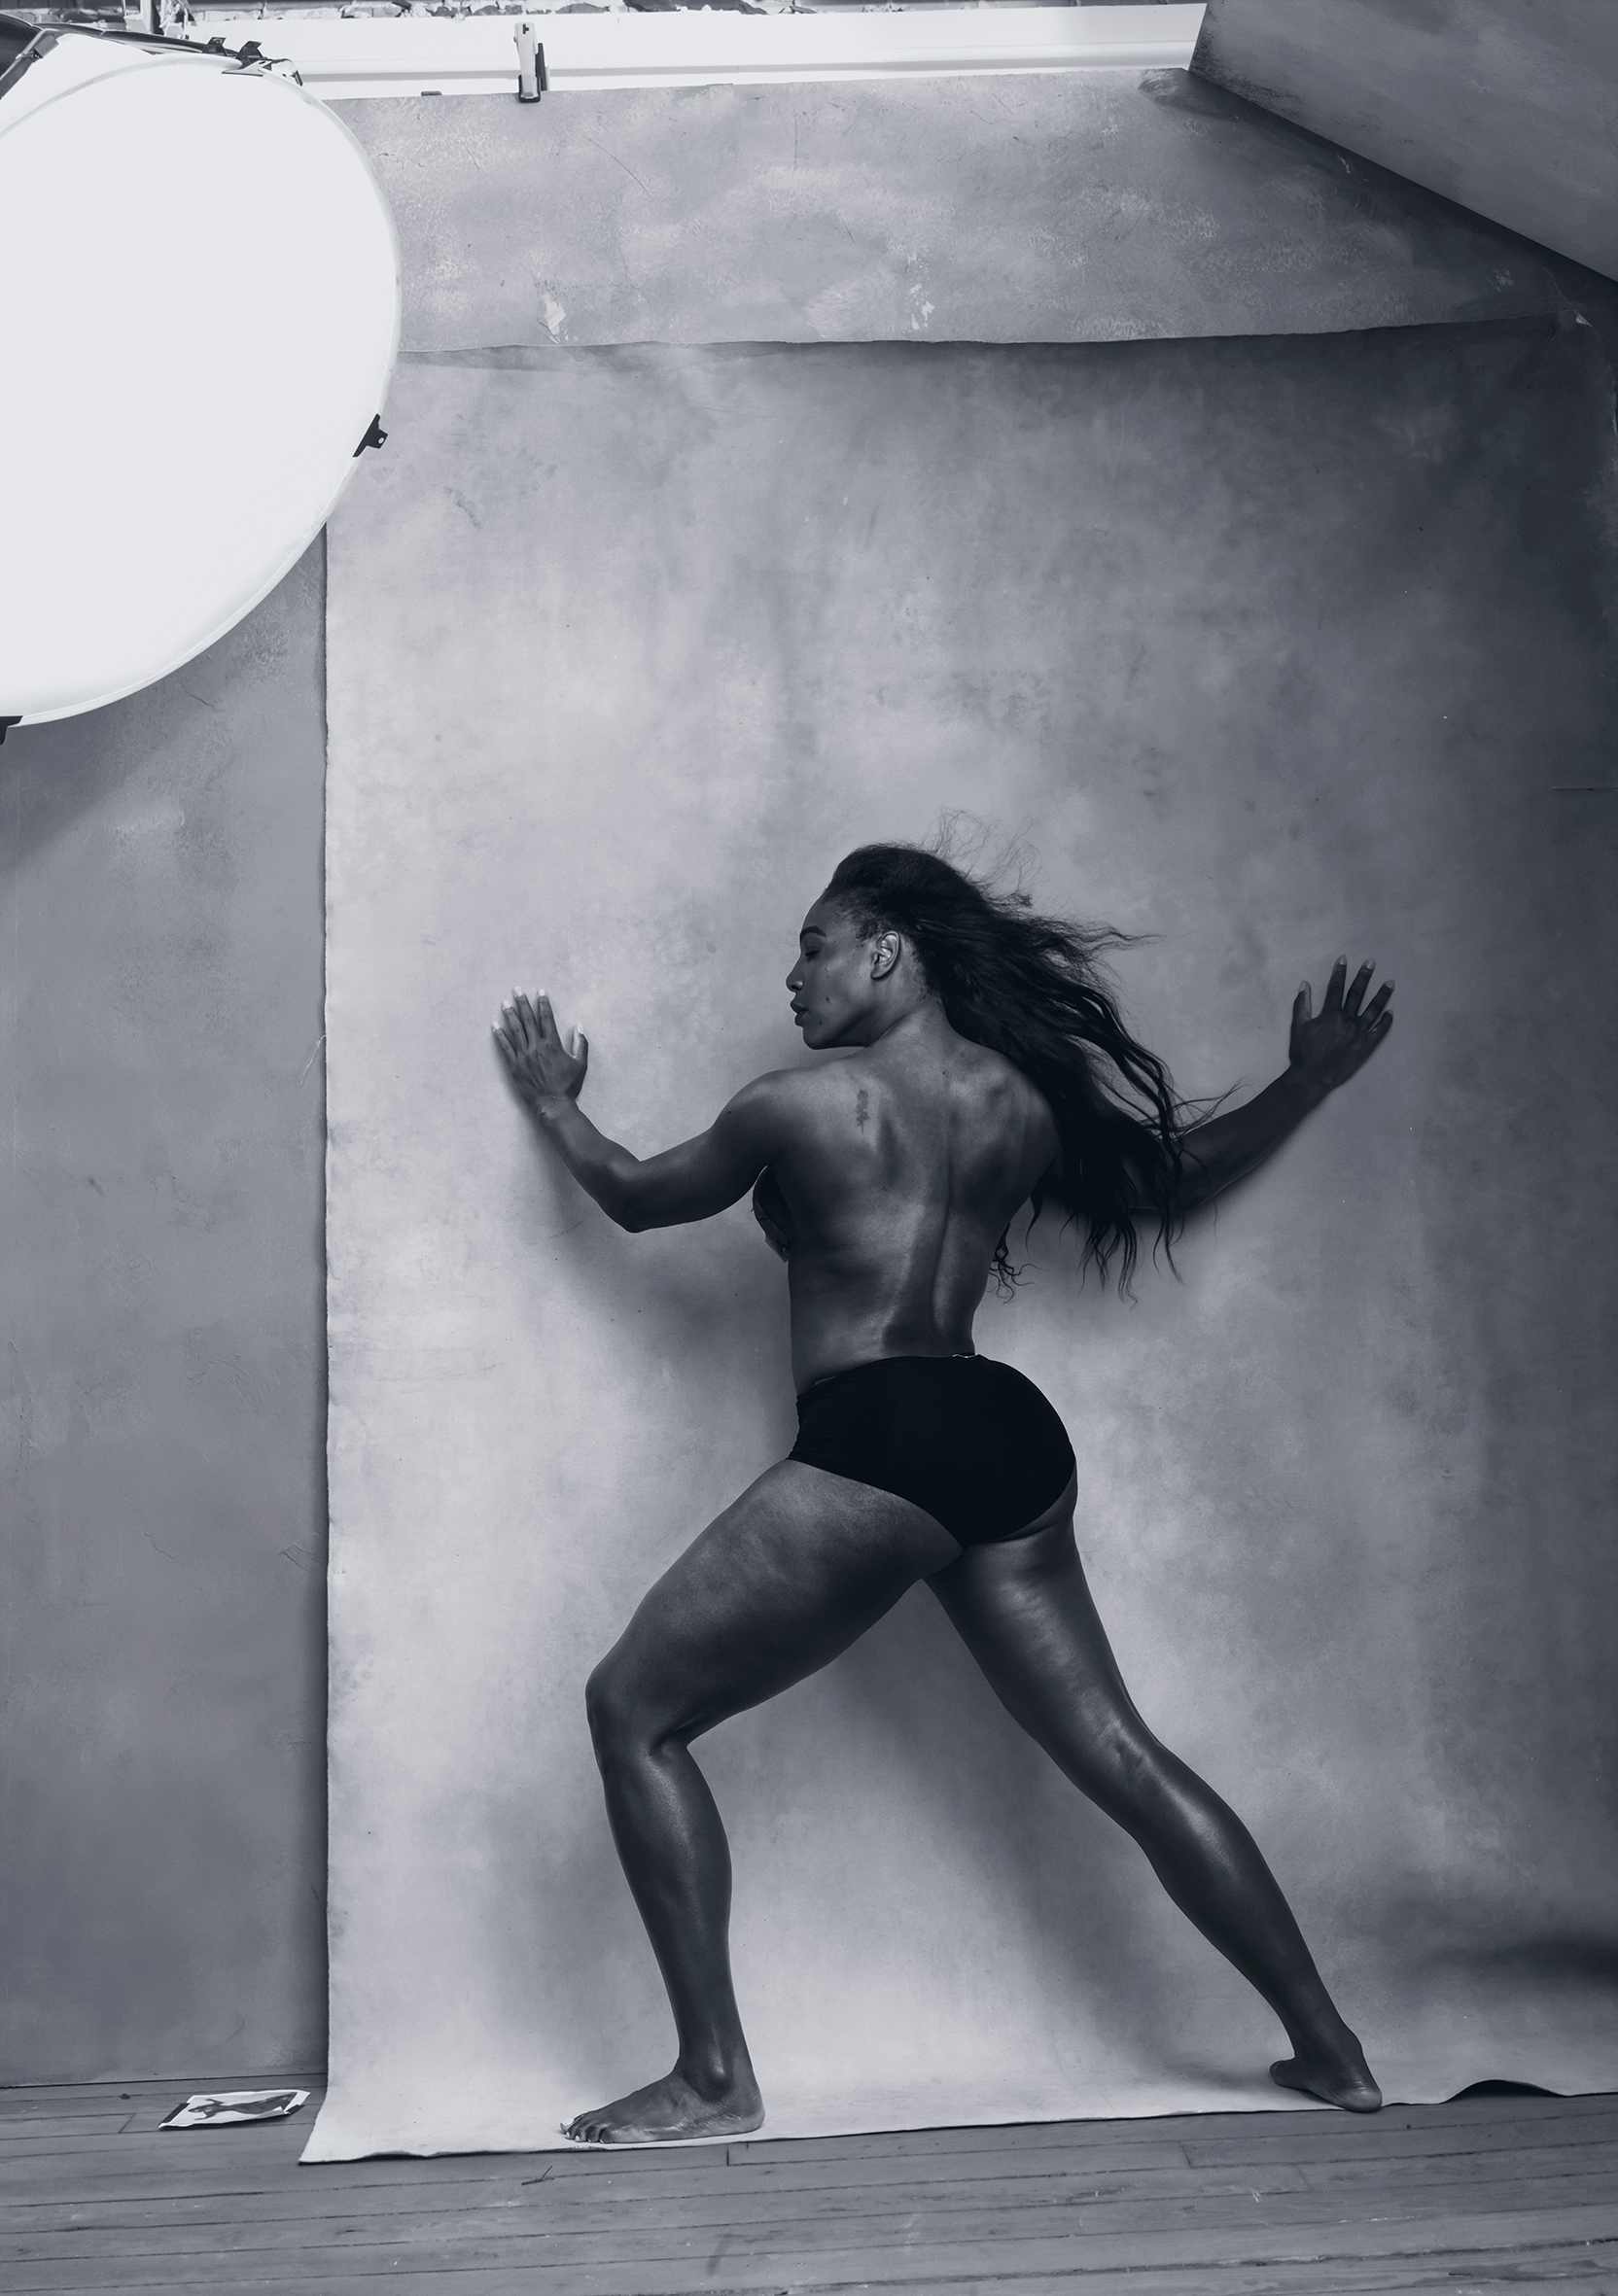 Pirelli Calendar 2016: First images released